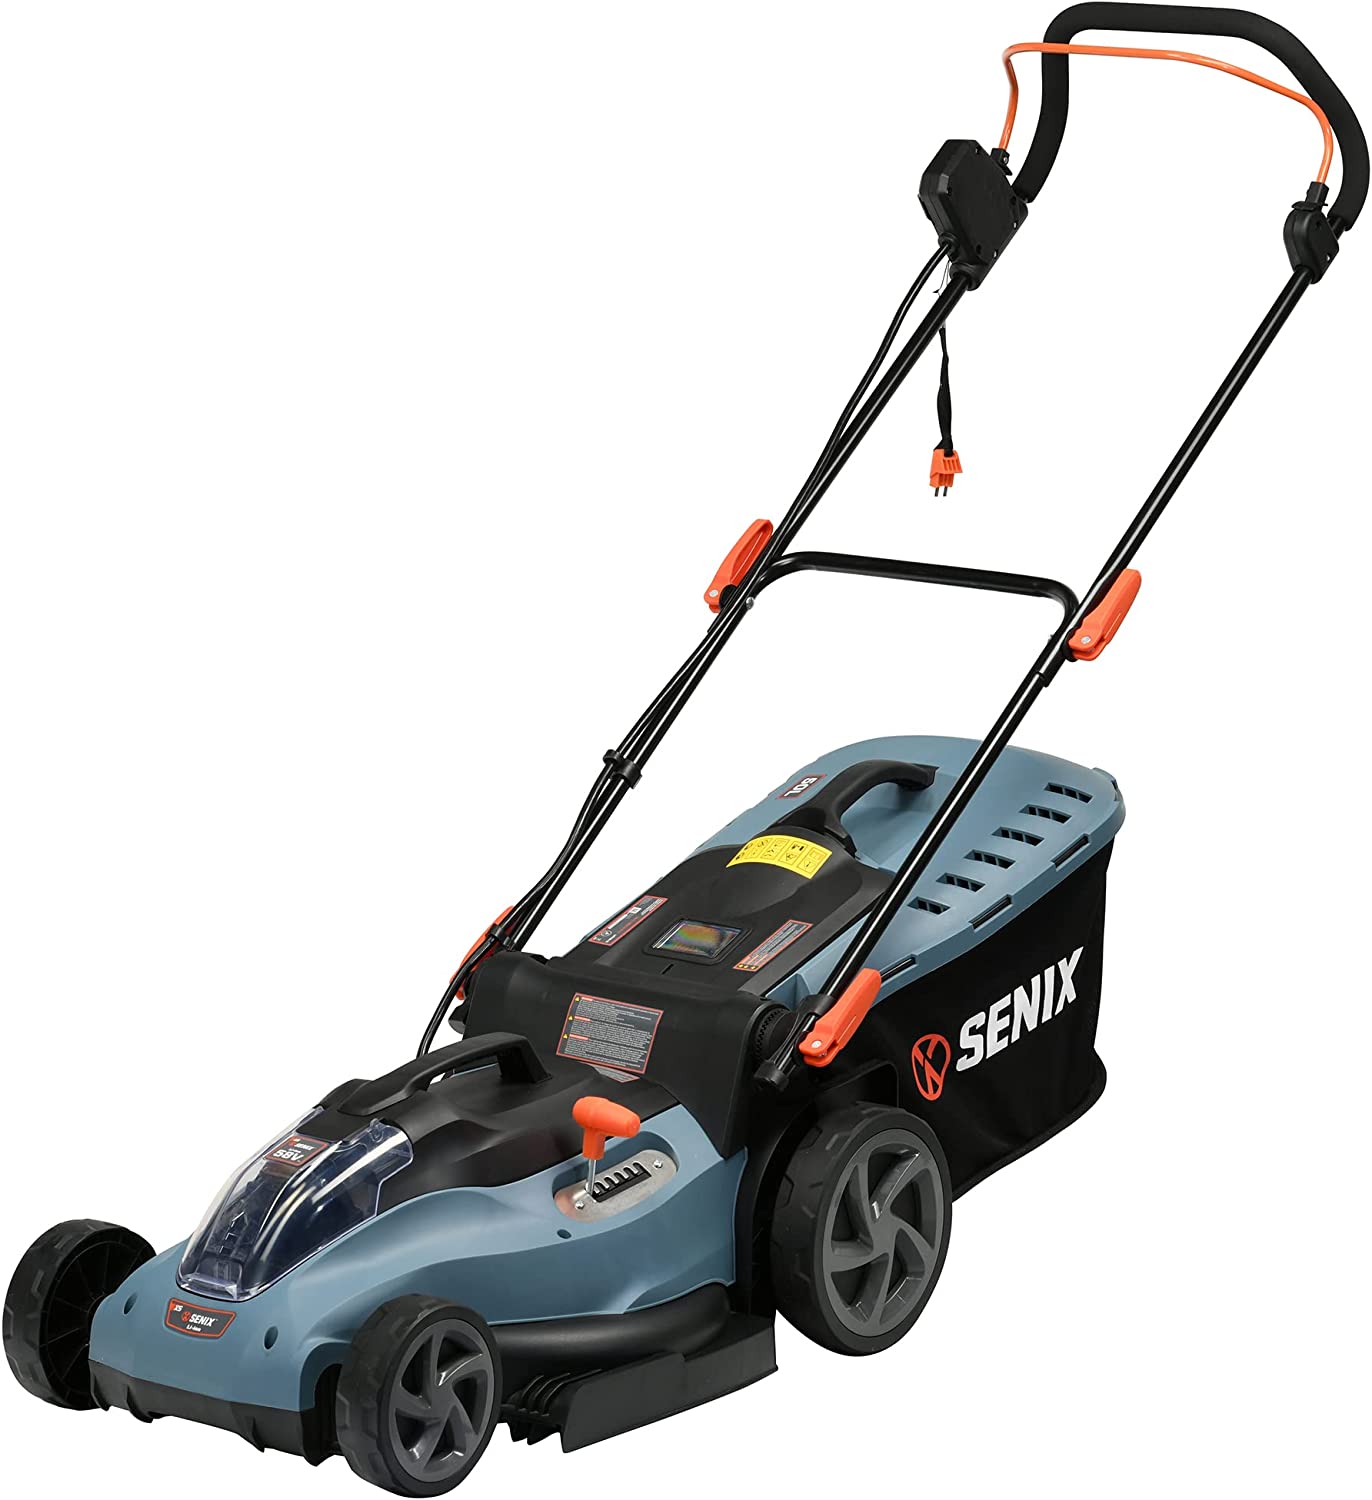 SENIX Electric Lawn Mower， 17-Inch， 58V Max* Cordless Lawn Mower with Brushless Motor， 6-Position Height Adjustment， 2.5Ah Lithium Ion Battery and Charger Included， LPPX5-M， Blue